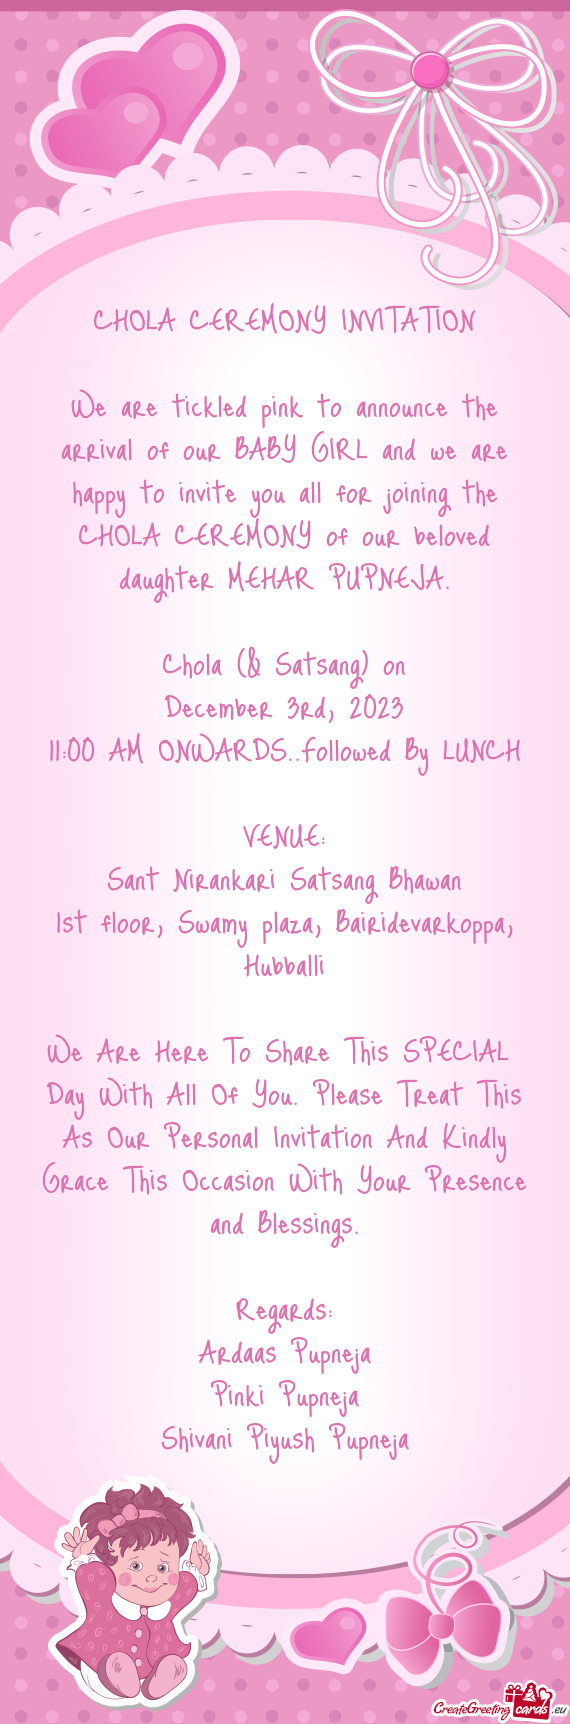 We are tickled pink to announce the arrival of our BABY GIRL and we are happy to invite you all for